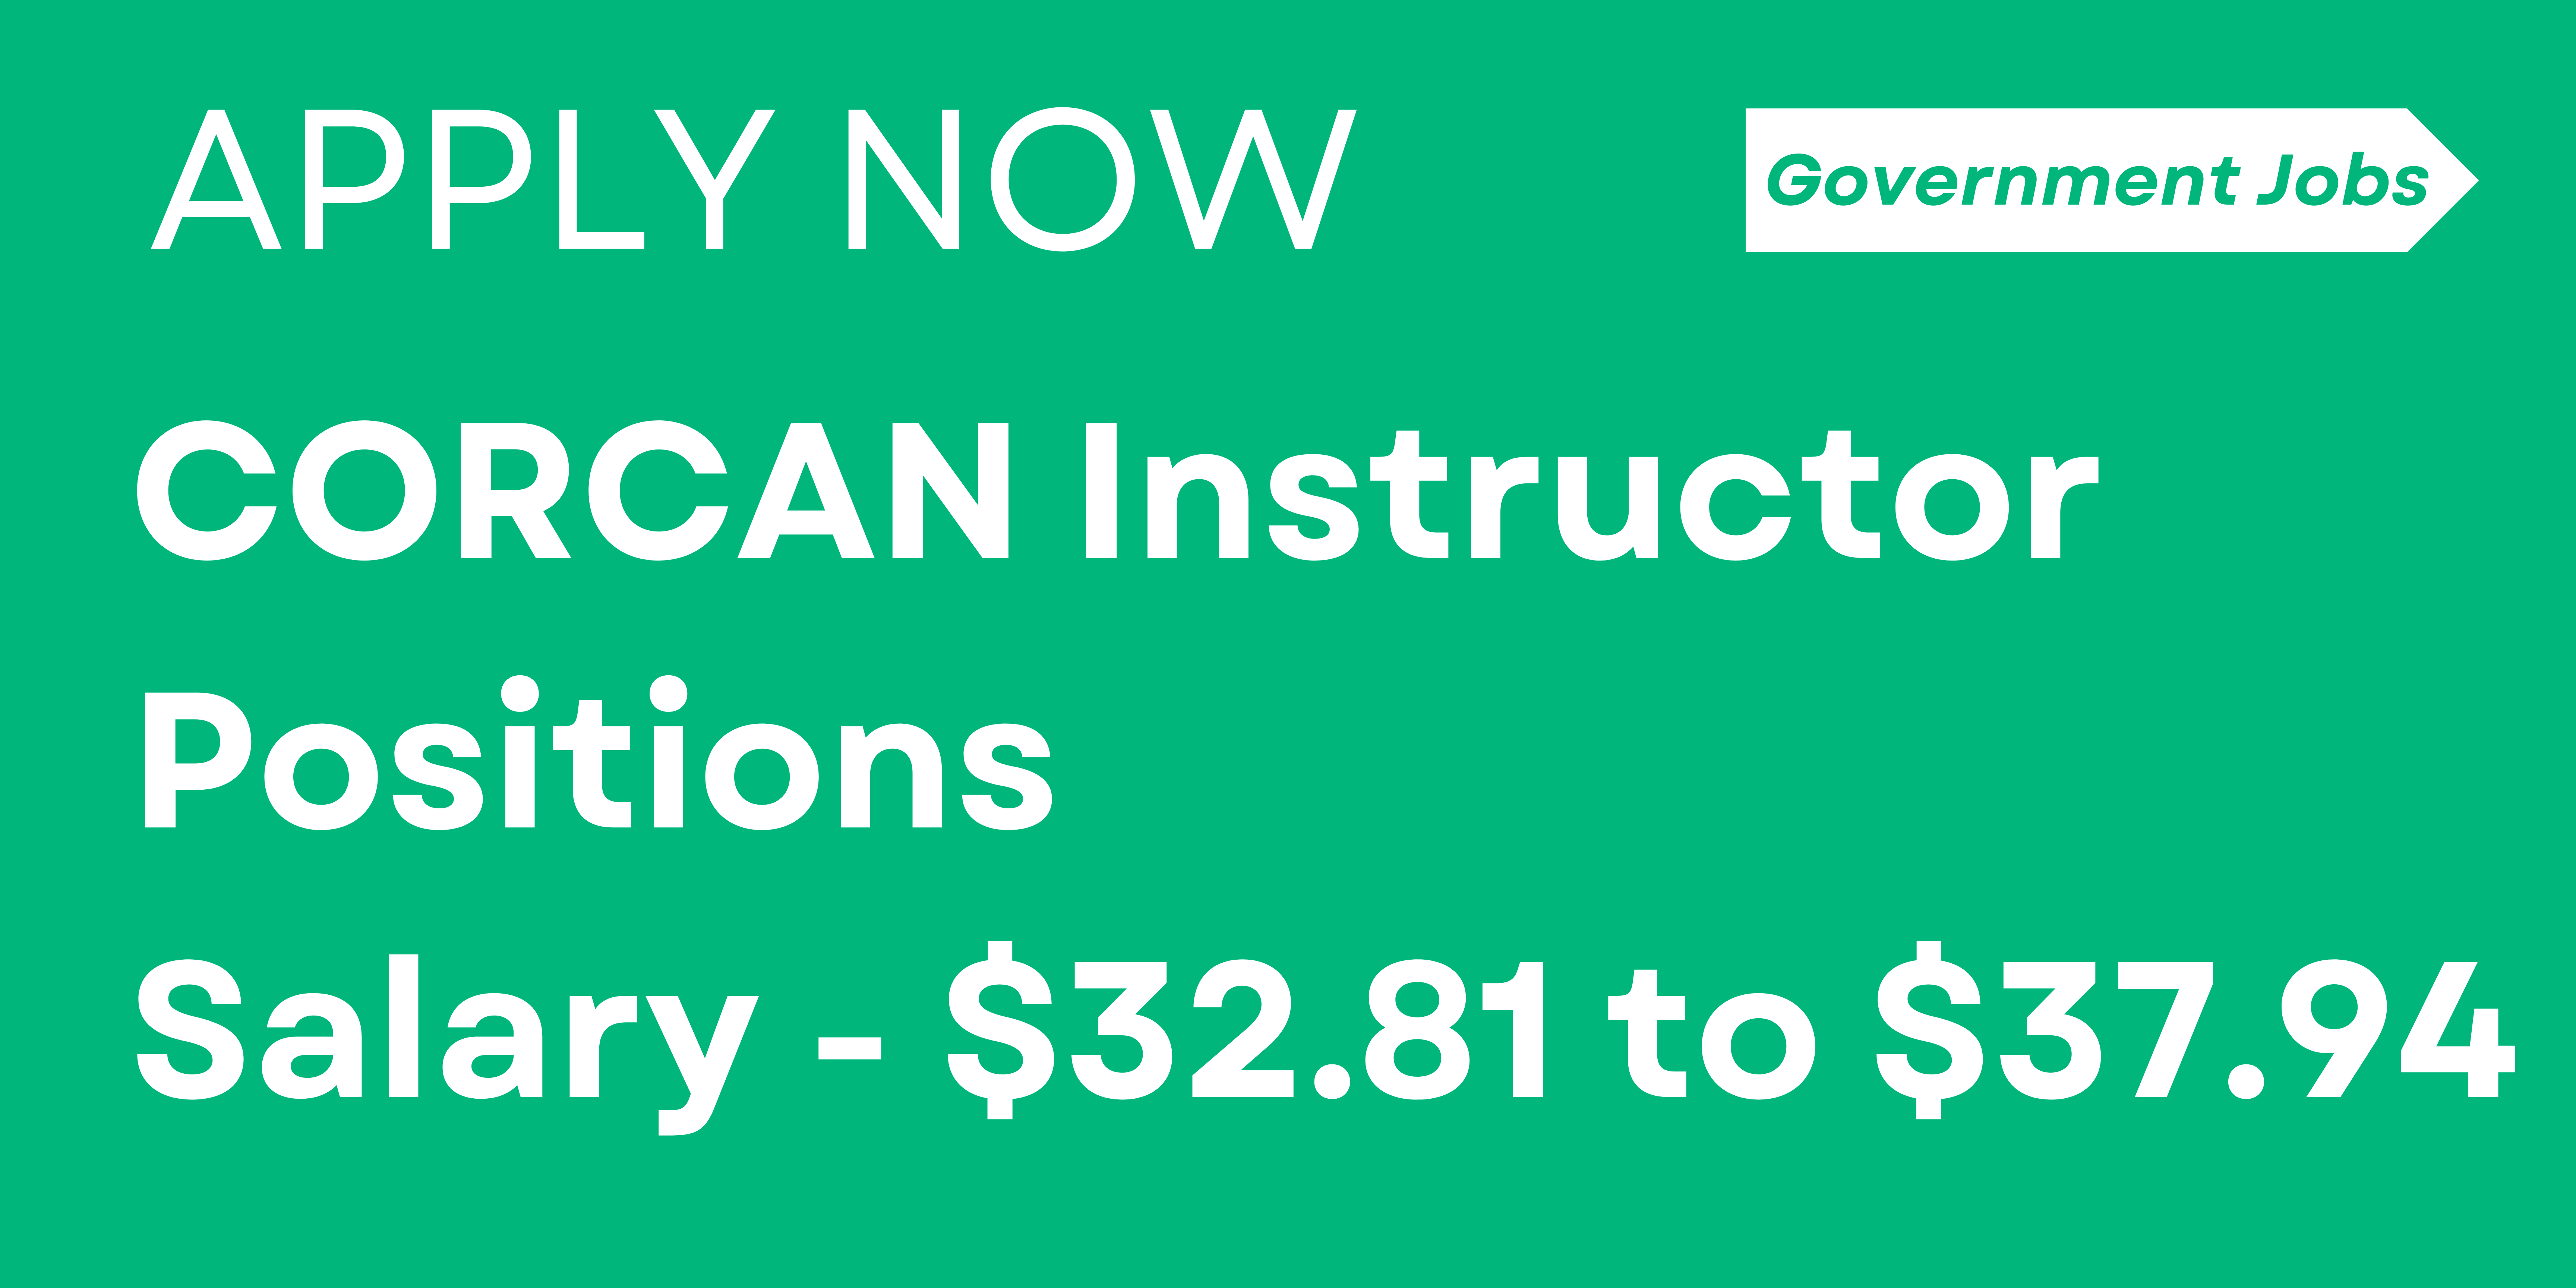 CORCAN Instructor Positions